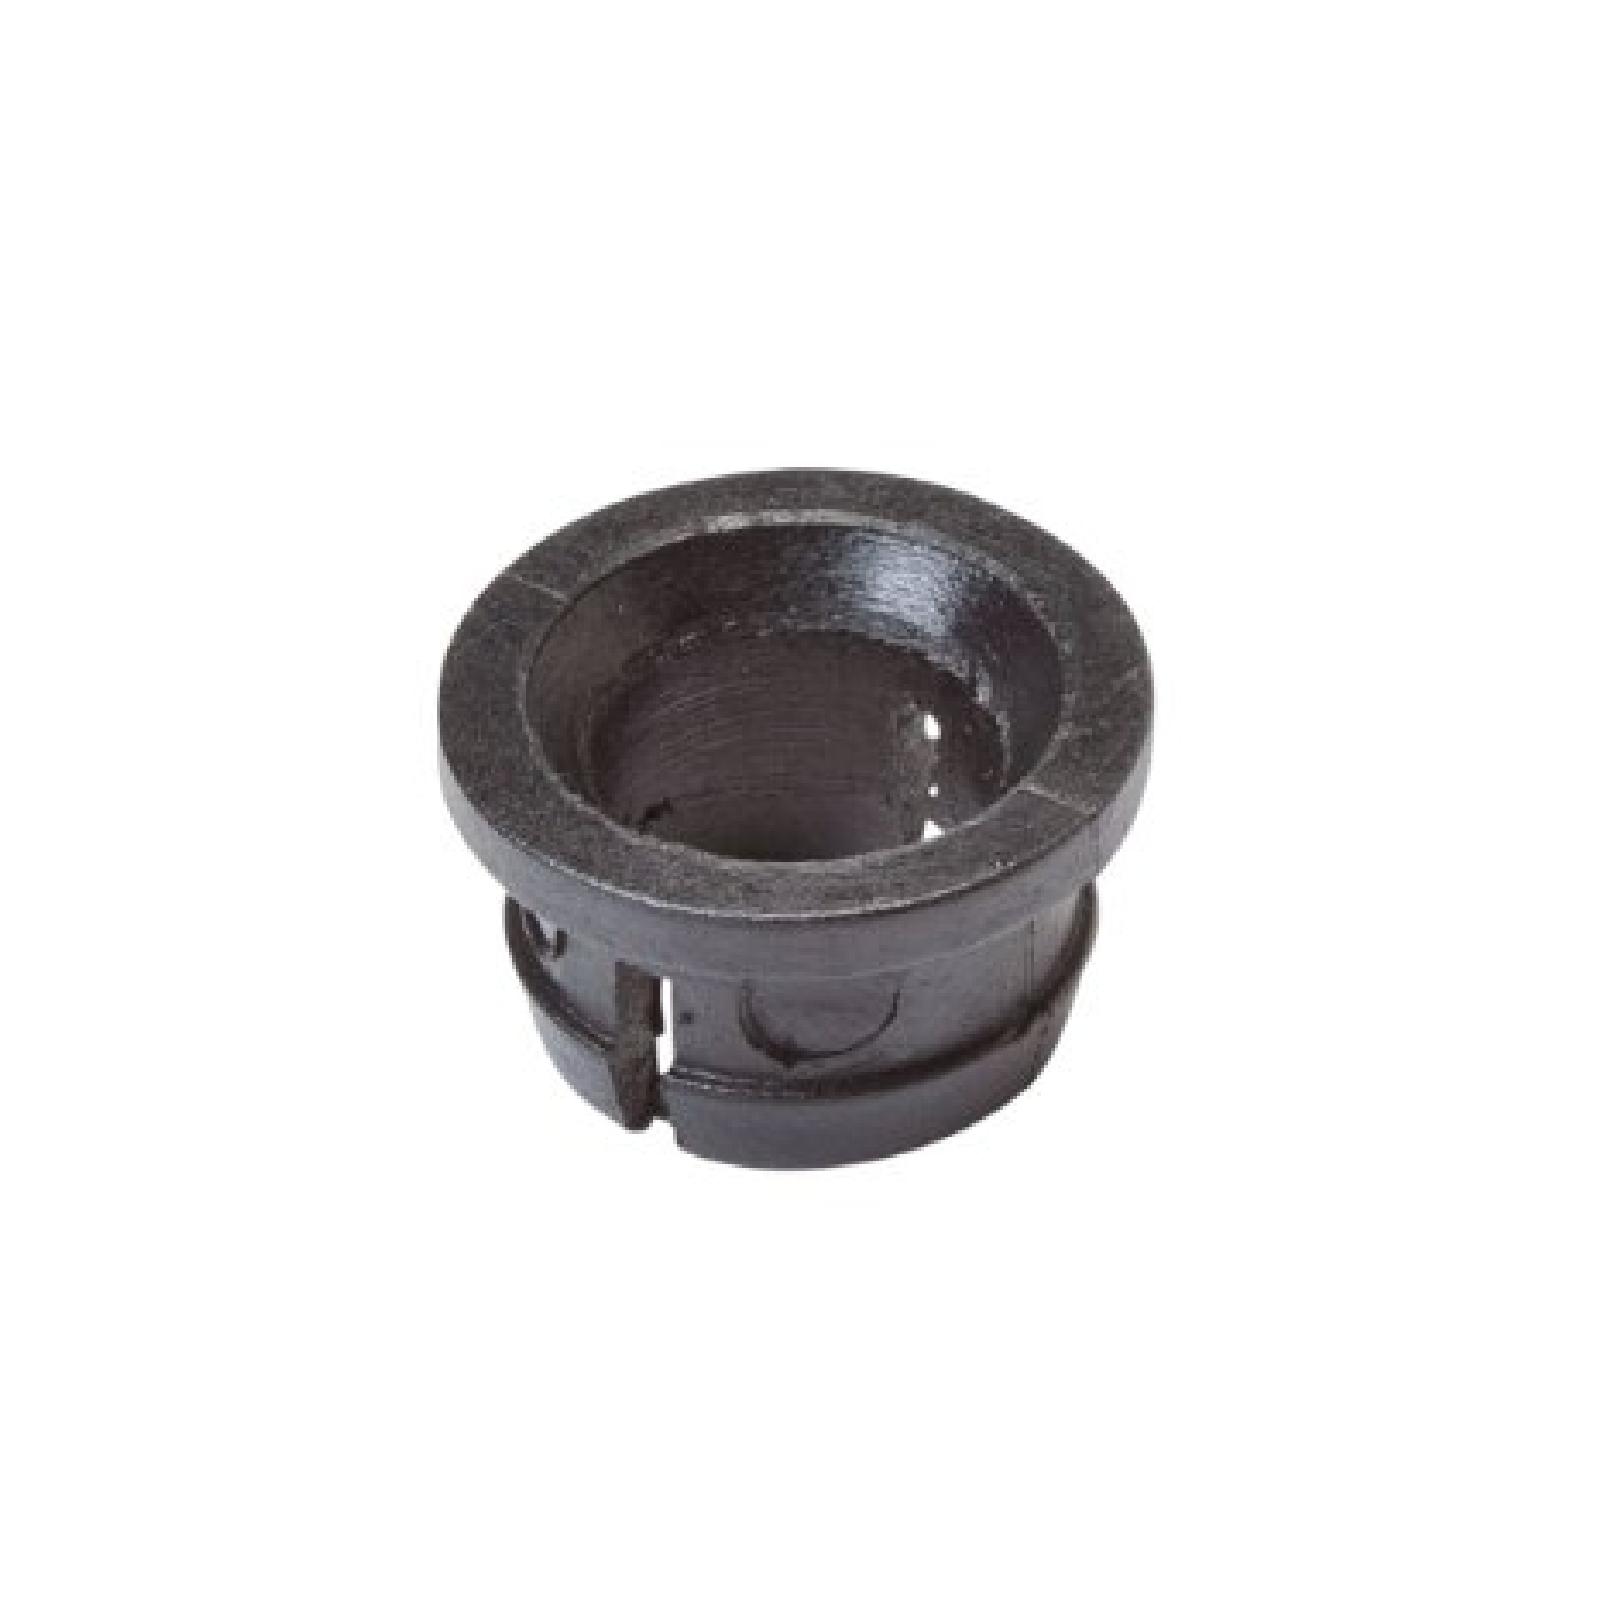 LAWN TRACTOR STEERING BUSHING replaces MTD 941-0475 part# 45-833